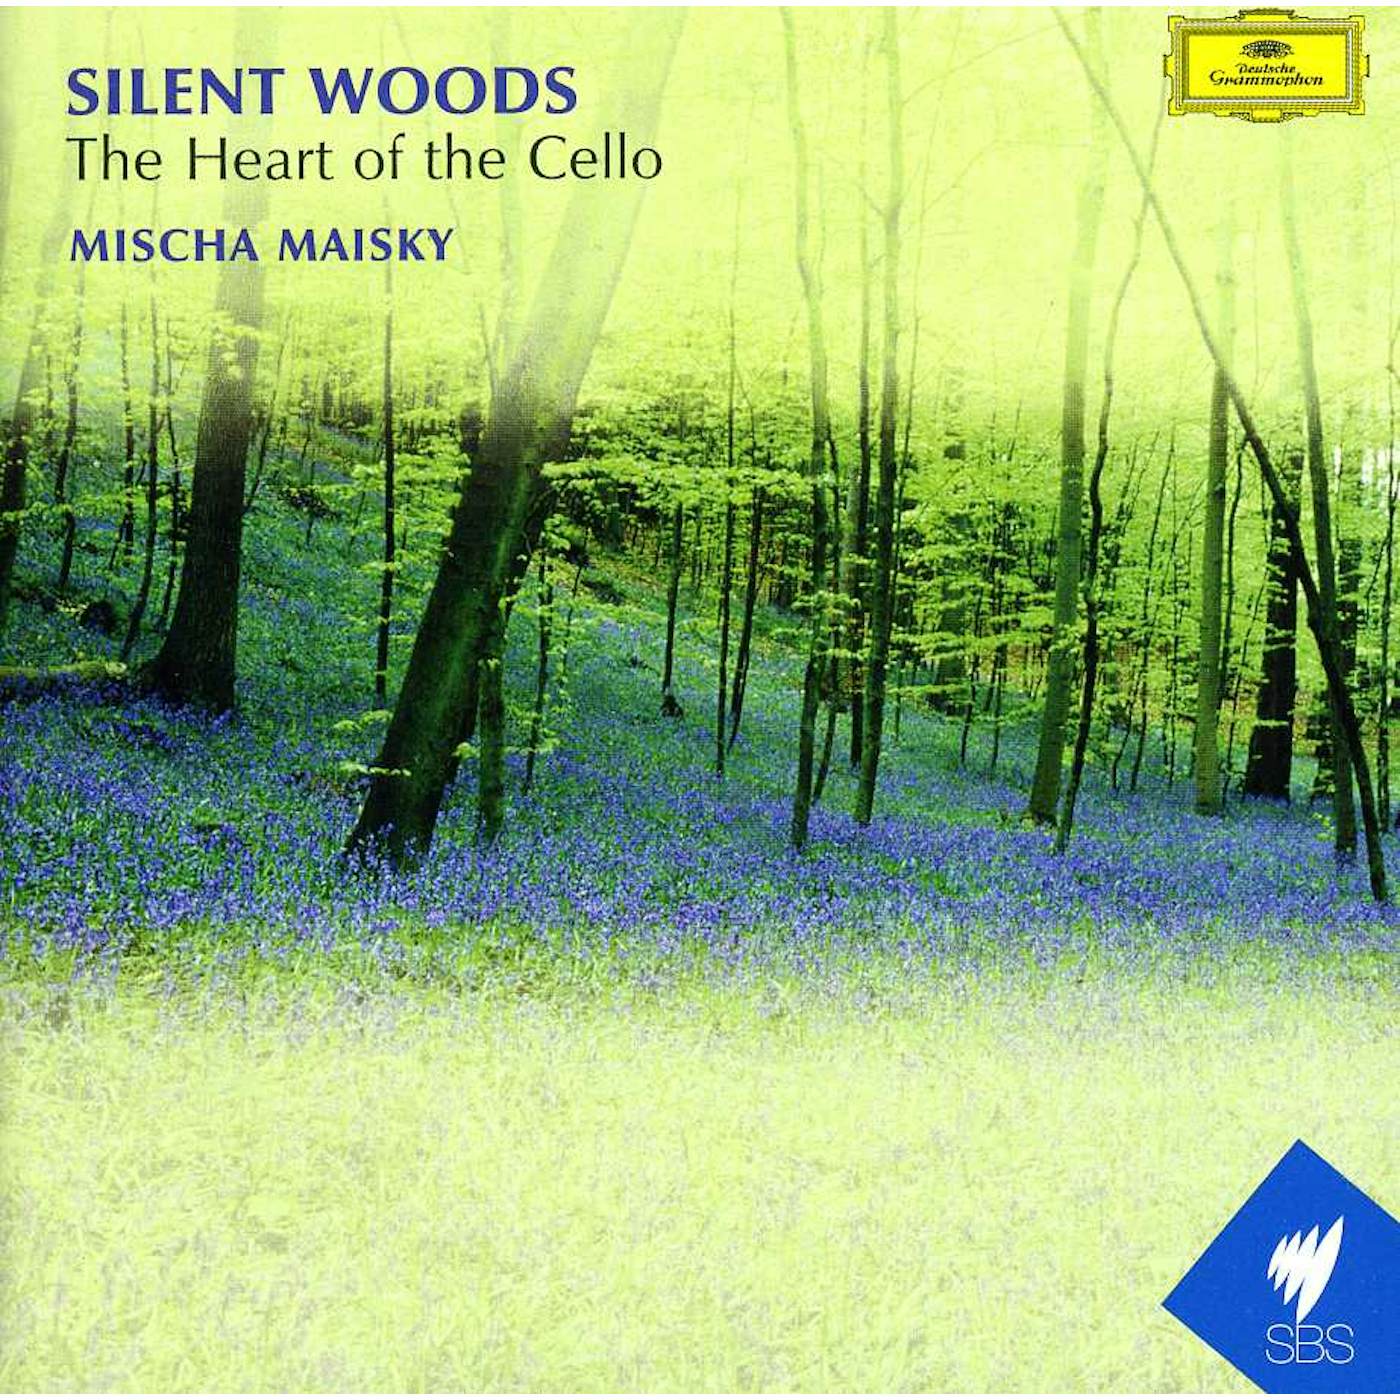 Mischa Maisky SILENT WOODS: THE HEART OF THE CELLO CD